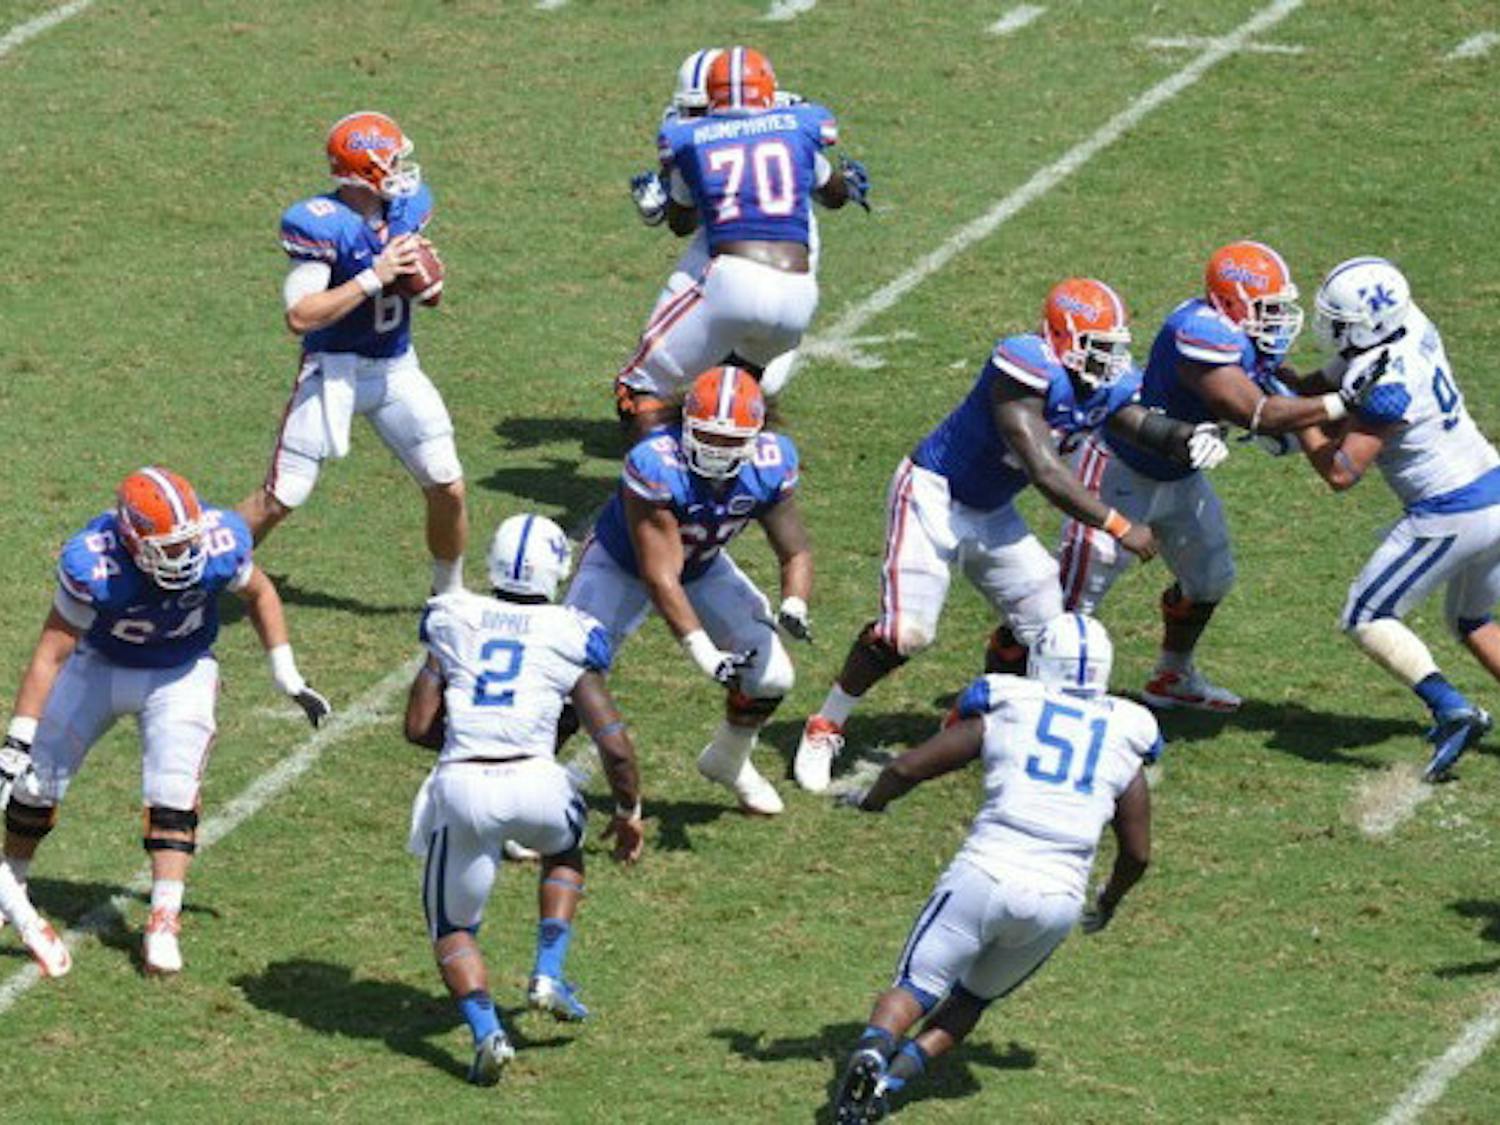 Sophomore quarterback Jeff Driskel (6) drops back to pass as his offensive line withstands the rush against the Kentucky Wildcats on Saturday at Ben Hill Griffin Stadium. Despite injuries, the Florida offensive line has progressed in pass and run blocking since playing Texas A&amp;M in the conference opener on Sept. 8.